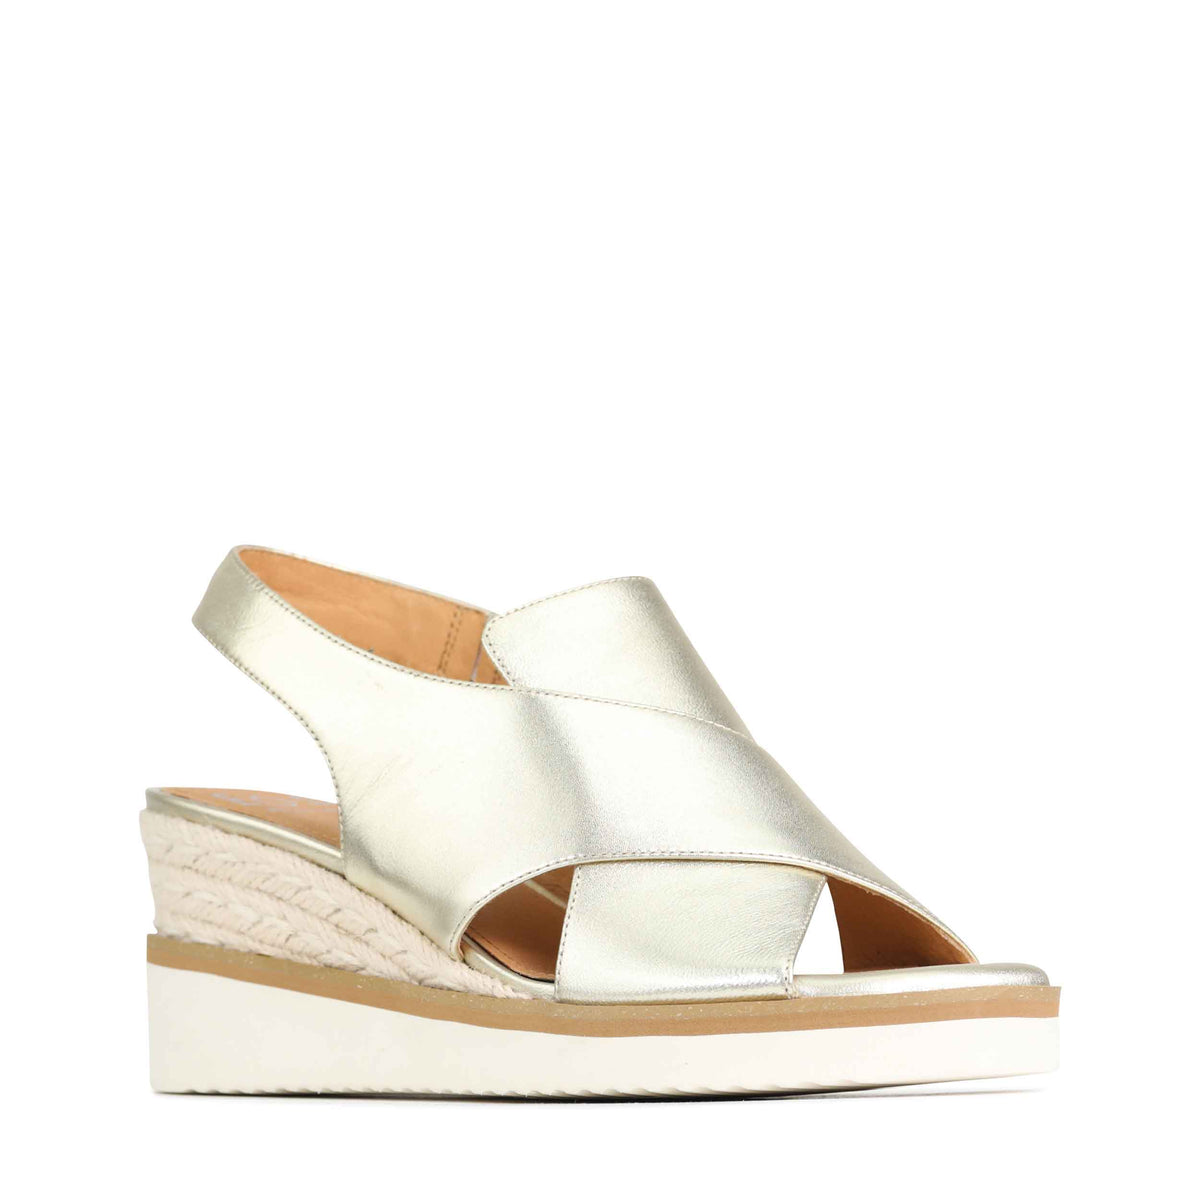 Parallel Culture Shoes and Fashion Online WEDGES EOS LAZING WEDGE